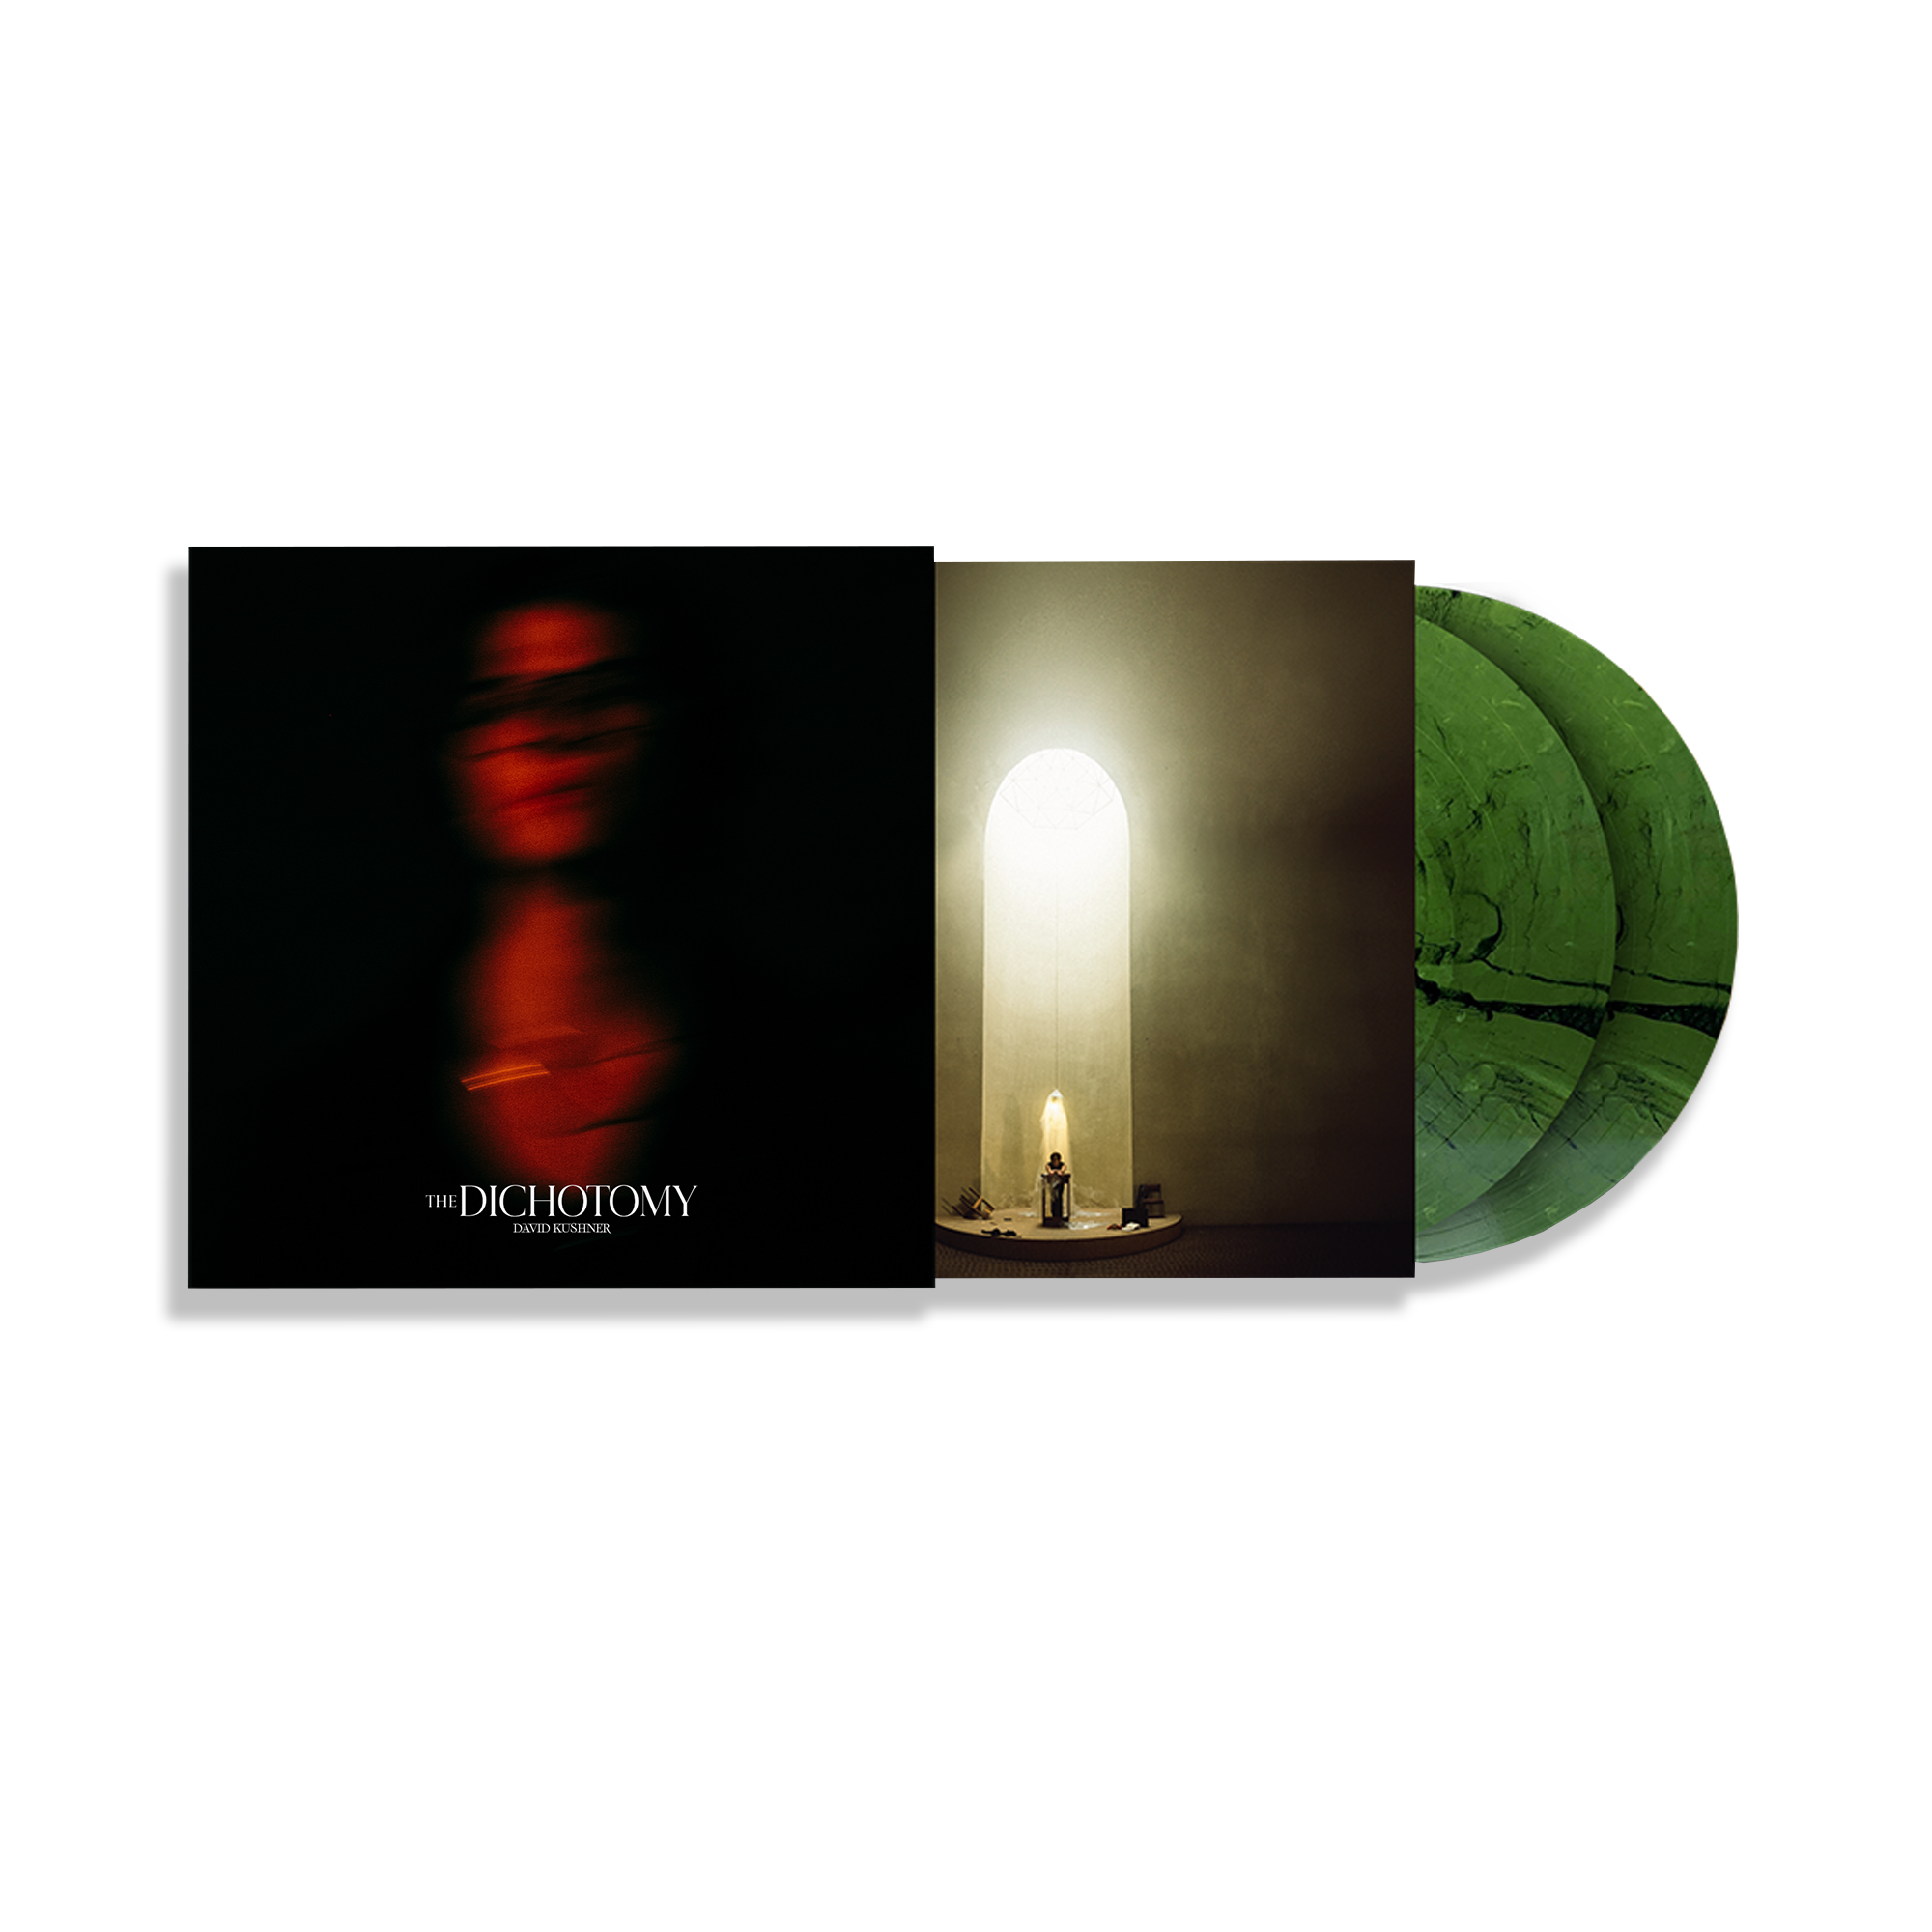 The Dichotomy: Artist Store Exclusive Green Marble 2LP + Limited Signed CD